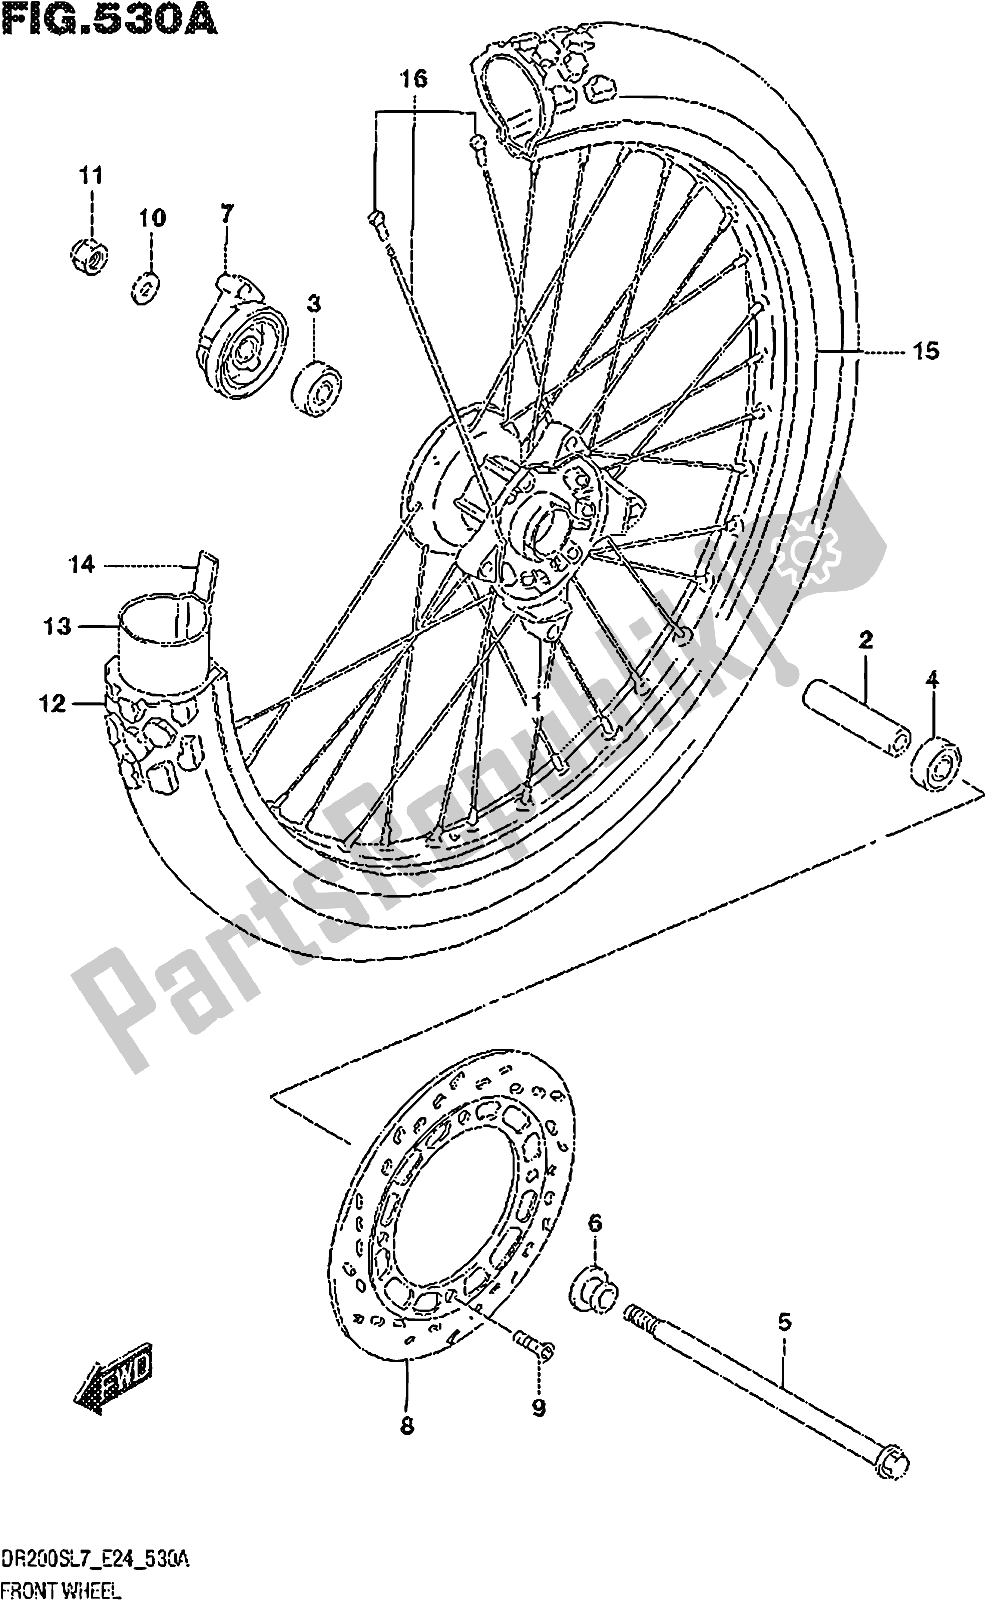 All parts for the Fig. 530a Front Wheel of the Suzuki DR 200S 2017